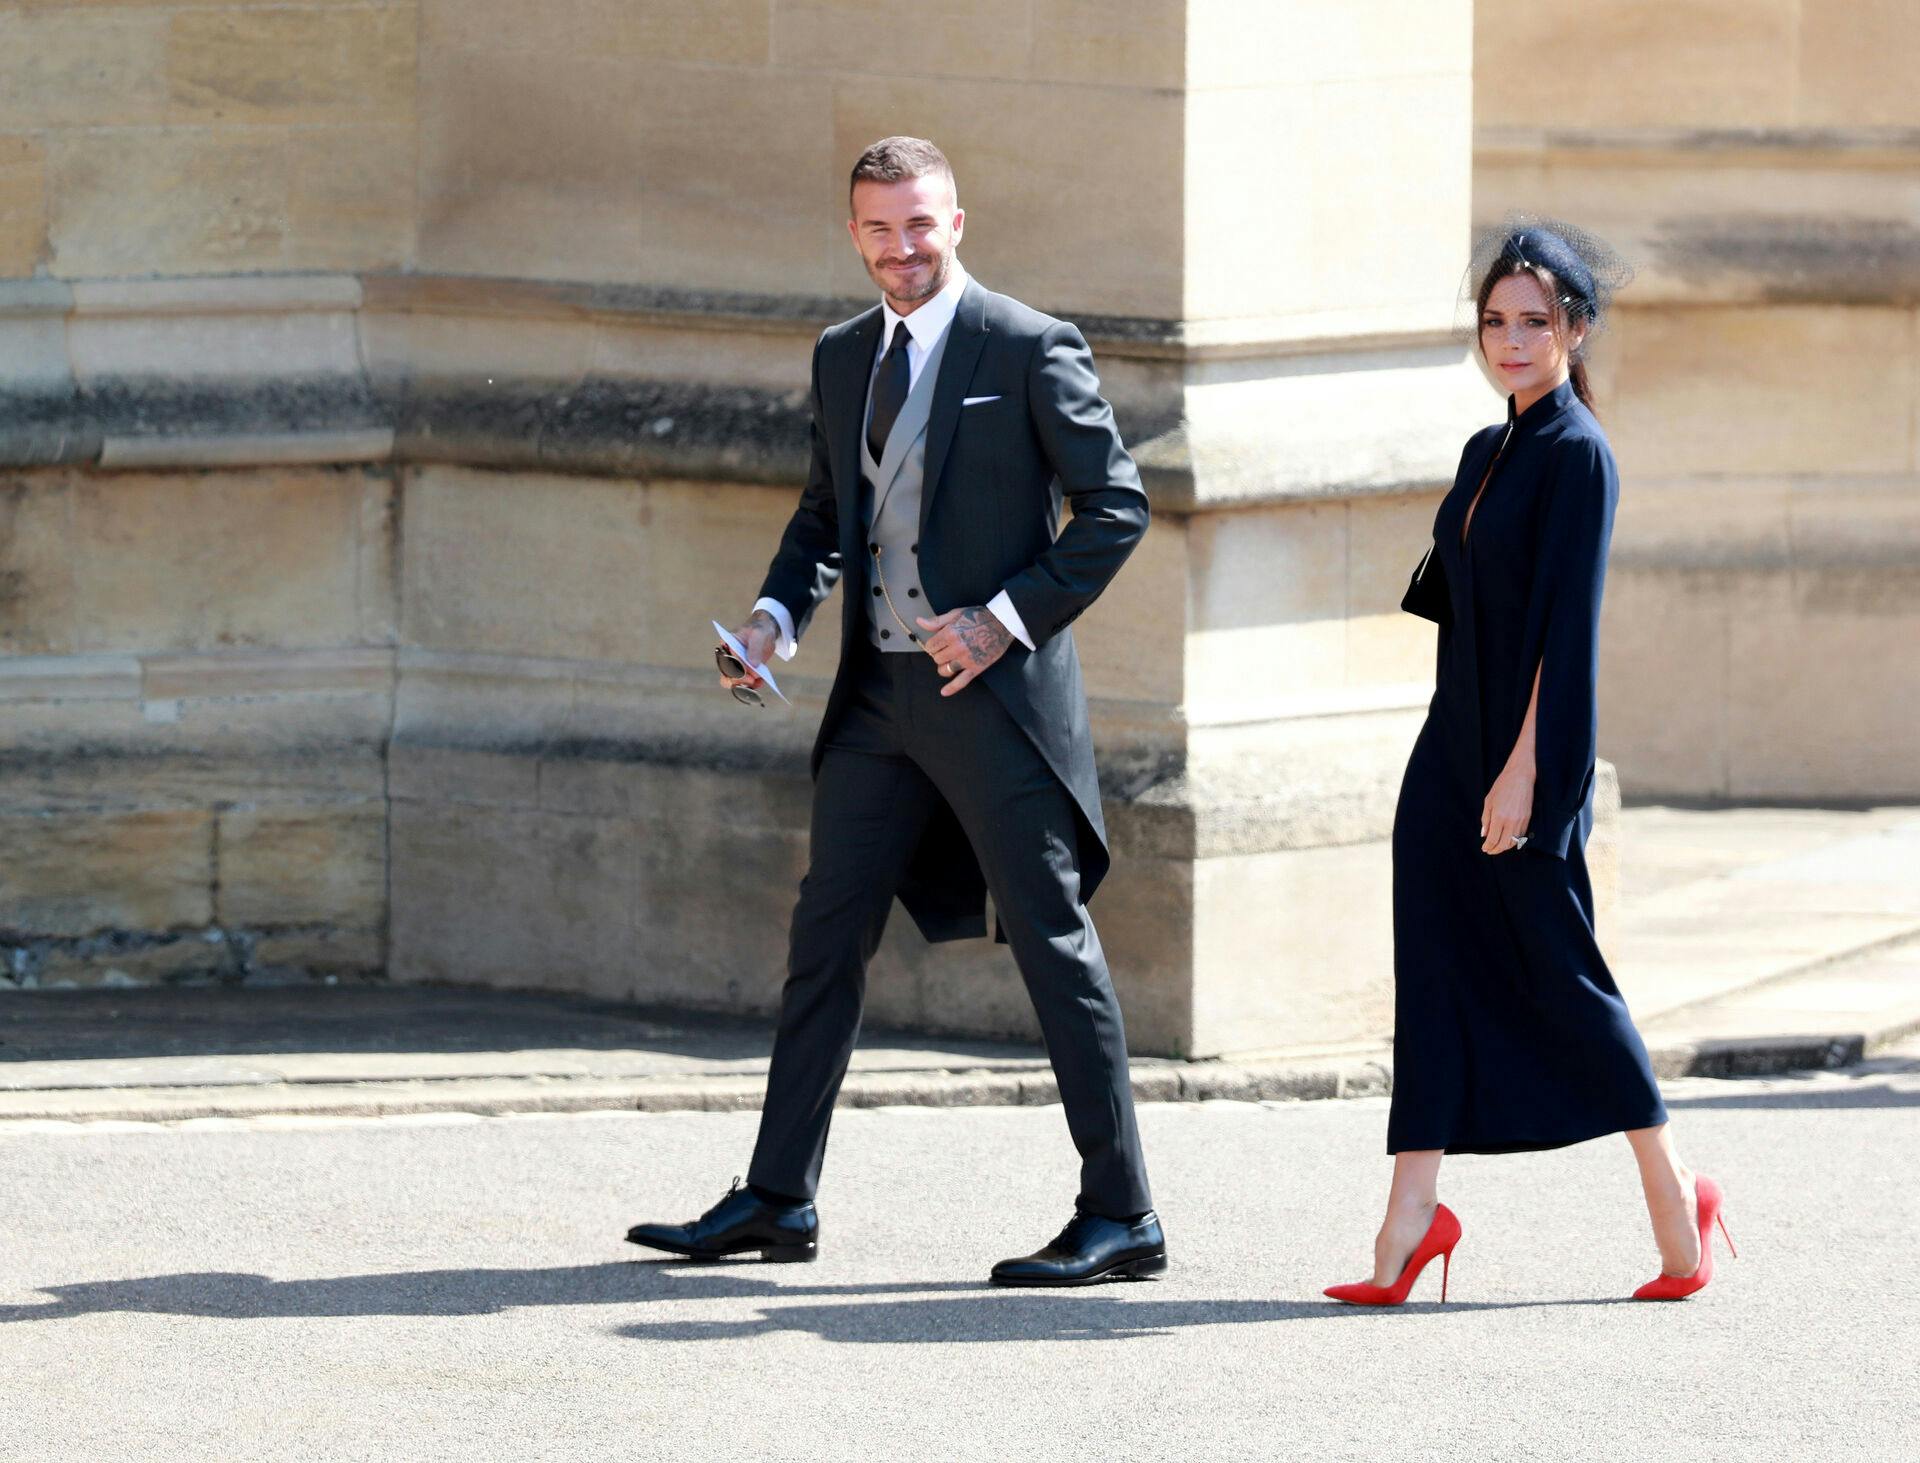 British fashion designer Victoria Beckham (R) and her husband, British former soccer player David Beckham arrive for the royal wedding ceremony of Britain's Prince Harry and Meghan Markle at St George's Chapel in Windsor Castle, in Windsor, Britain, 19 May 2018. LAUREN HURLEY/Pool via REUTERS